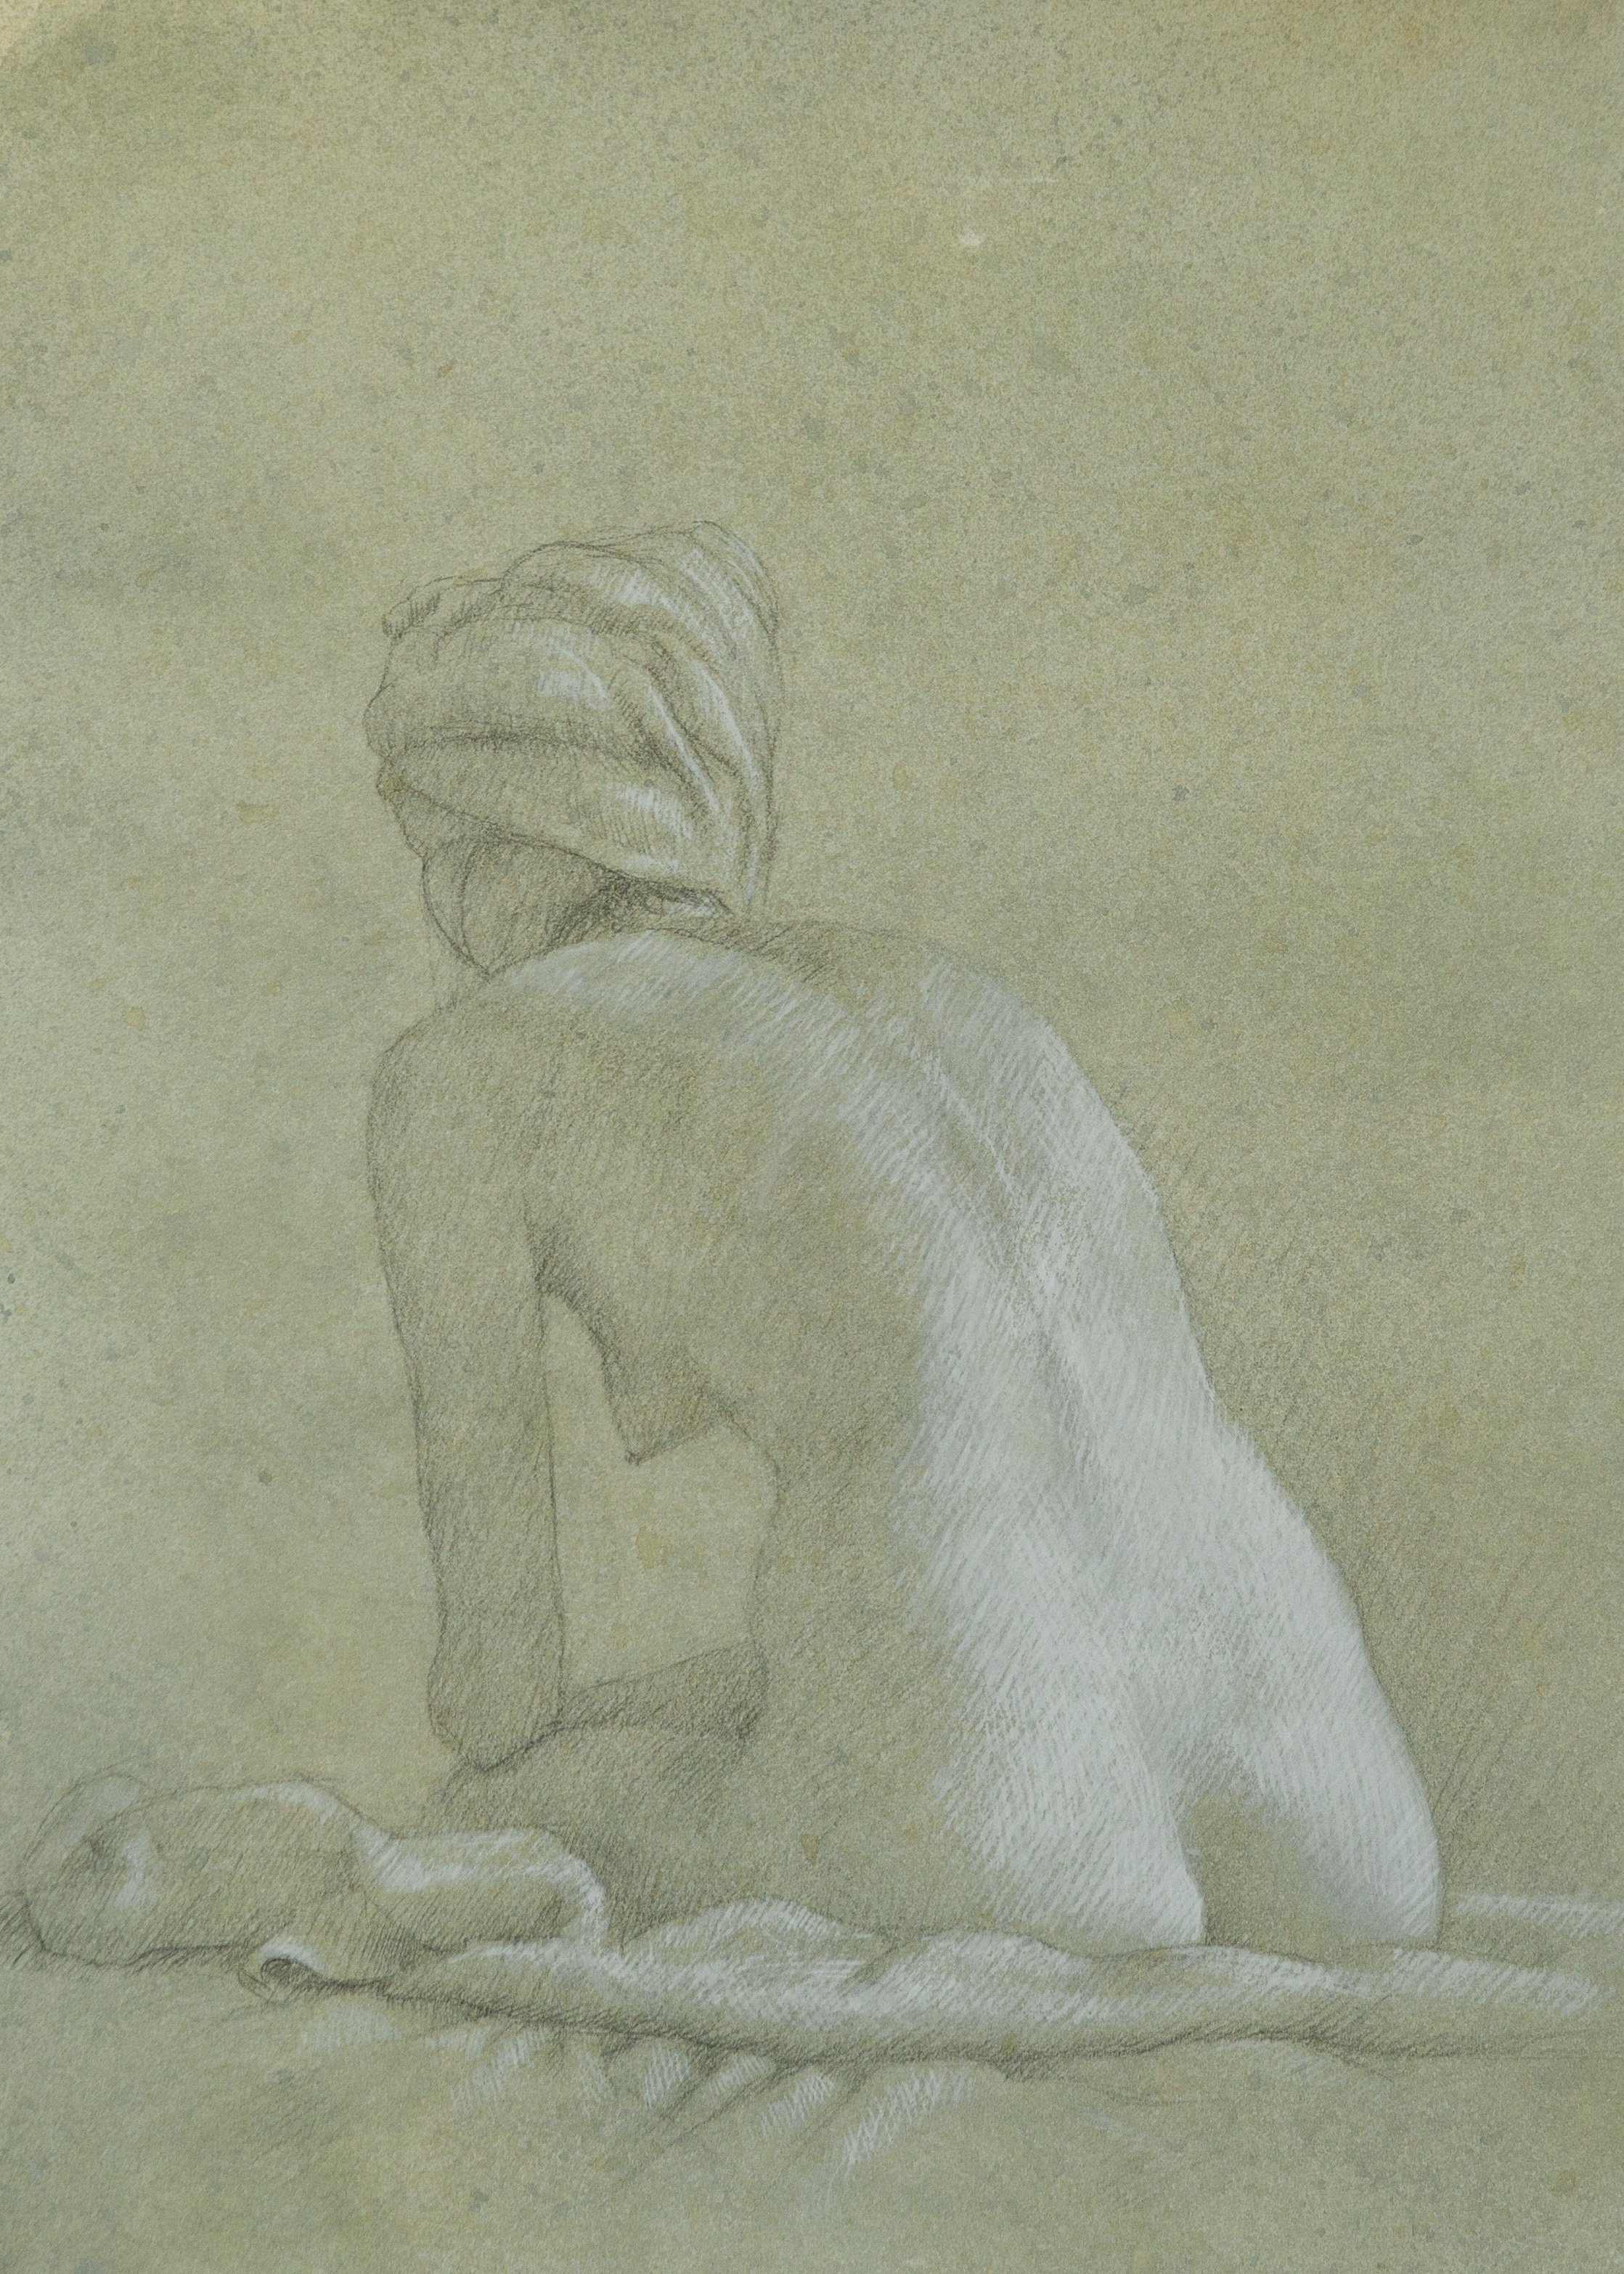 Miguel Carter-Fisher_Resting_Charcoal and Guache on Toned Paper_13.25x18.5_2015.jpg